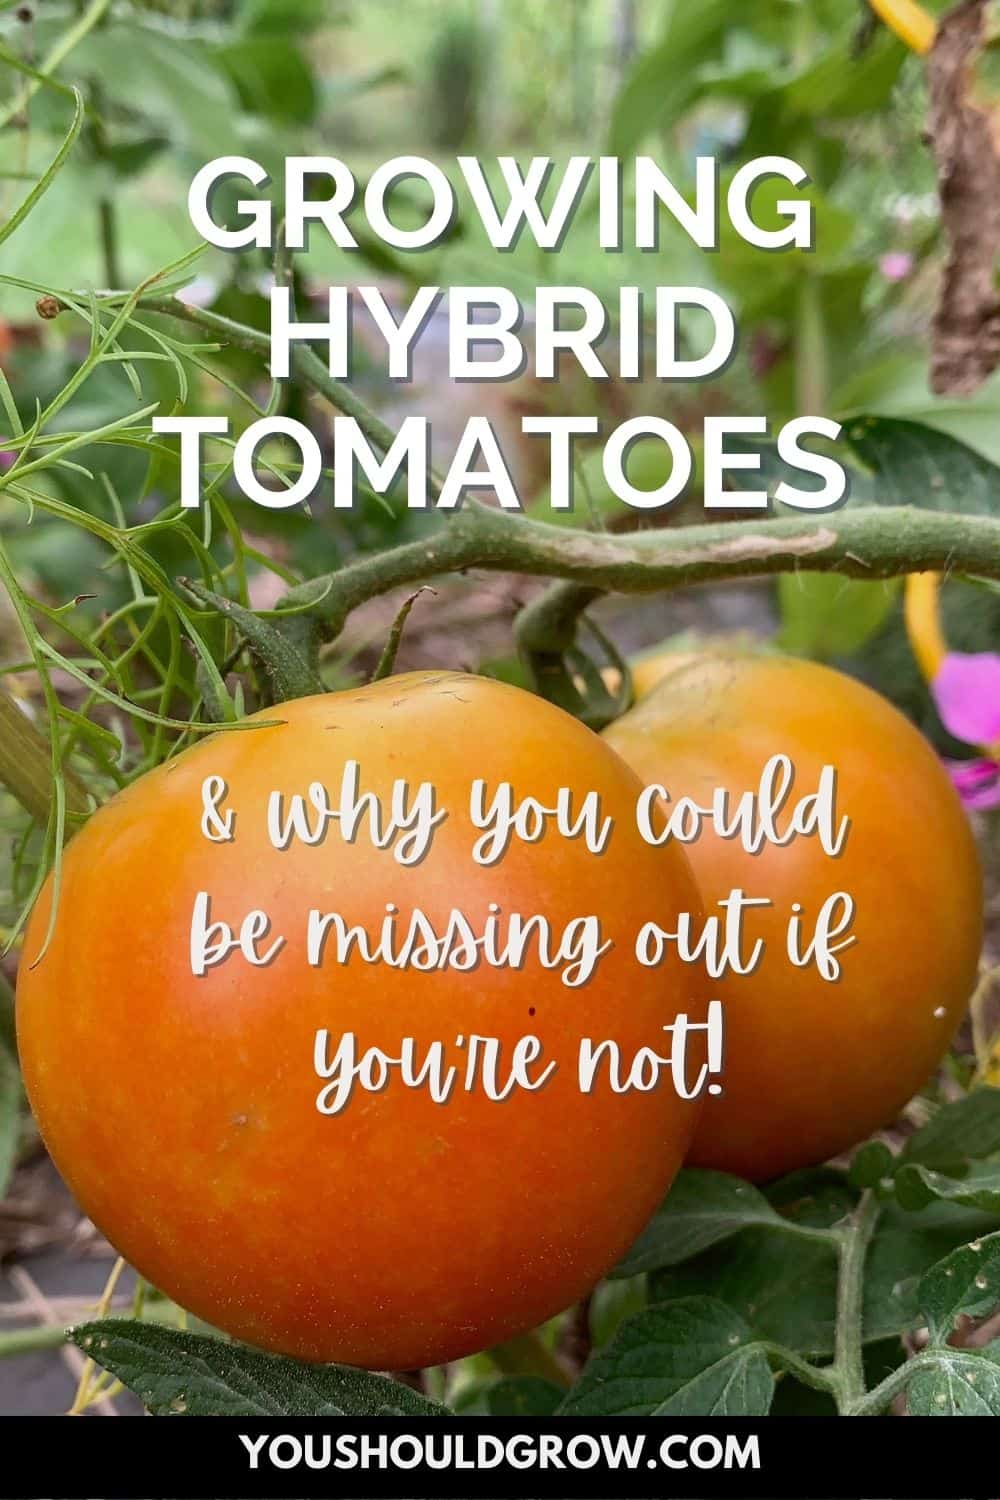 Heirloom tomatoes have their place, but there's no reason to be an heirloom snob. Find out why growing hybrid tomatoes can be a better choice.